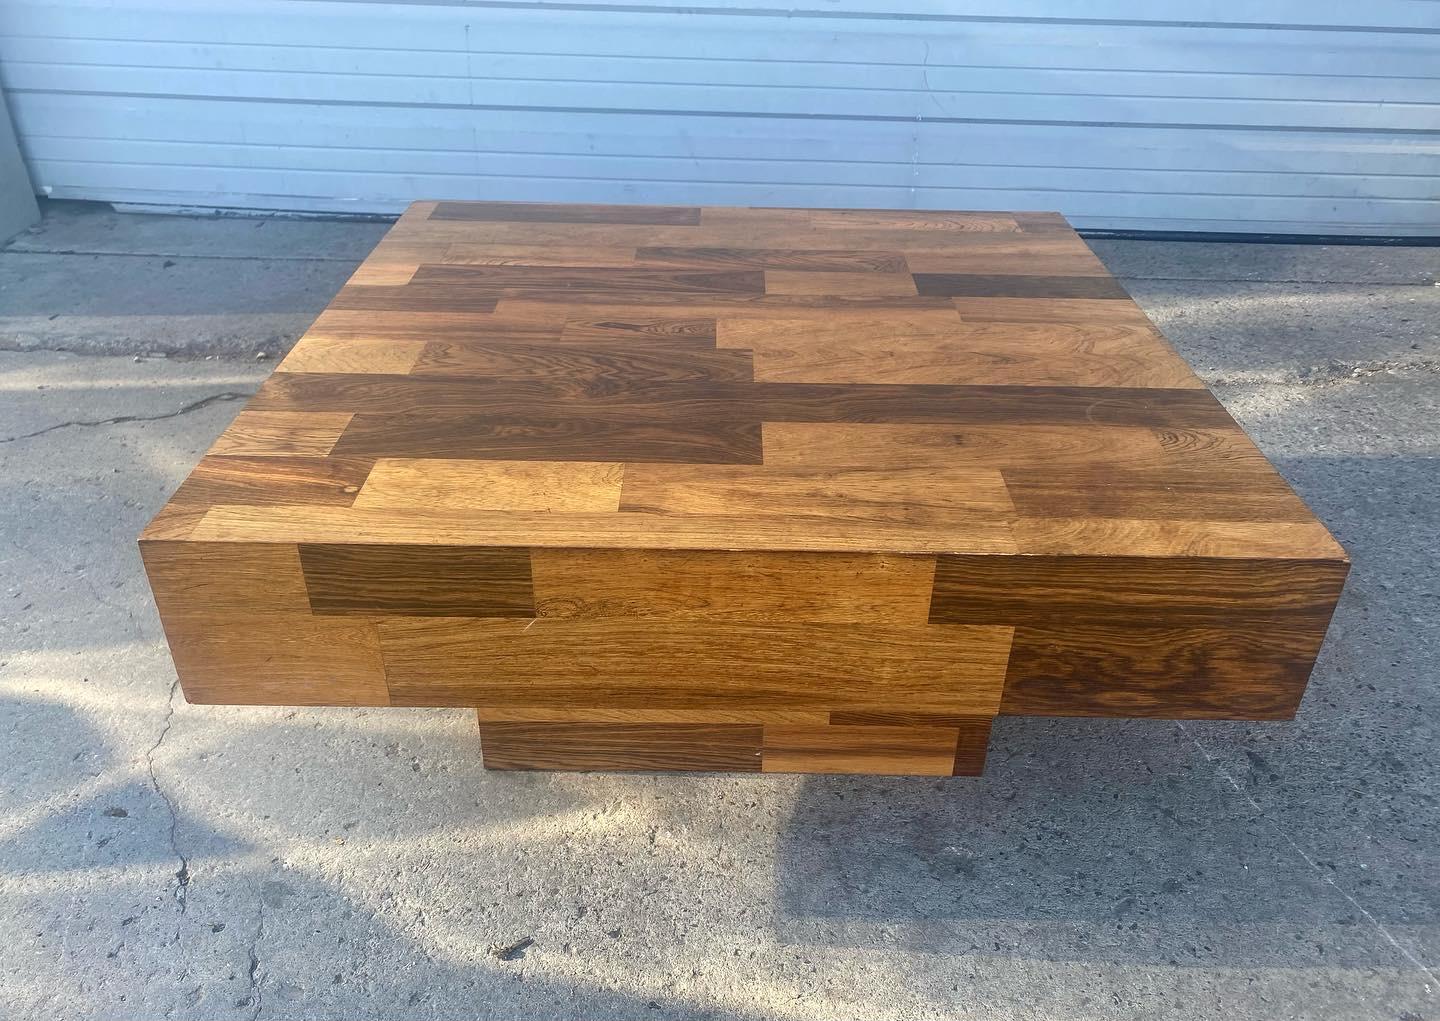 Classic Square Modernist Rosewood Coffee table attributed to Milo Baughman,,, Stunning rosewood ,parquet mixed woods ,,, nice original condition,,patina,, minor ring to top (see photo),, Hand delivery to New York City or anywhere en route from